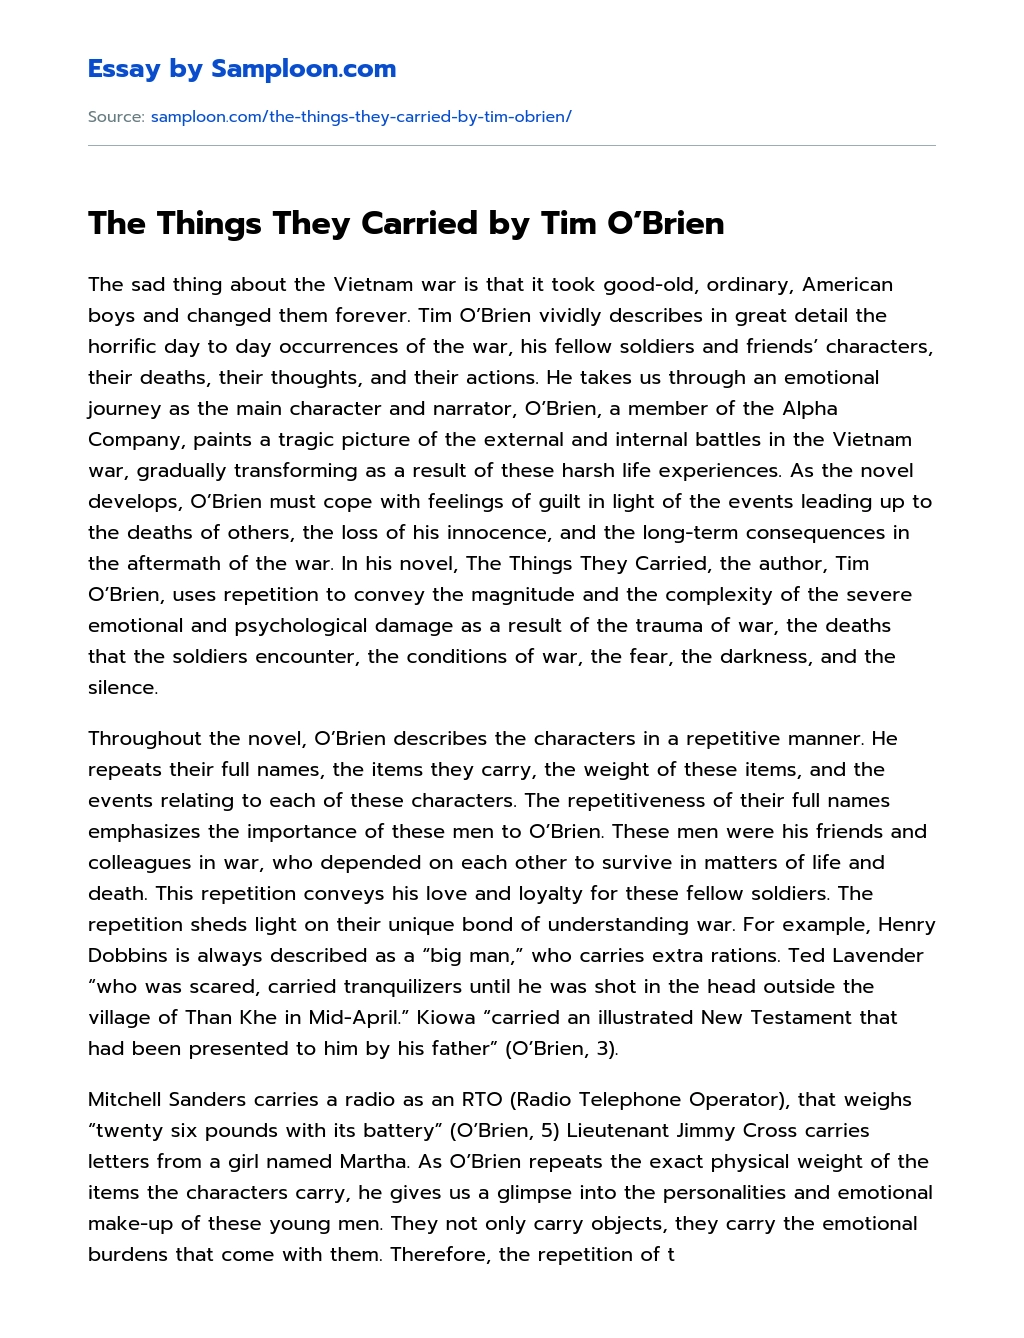 The Things They Carried by Tim O’Brien essay